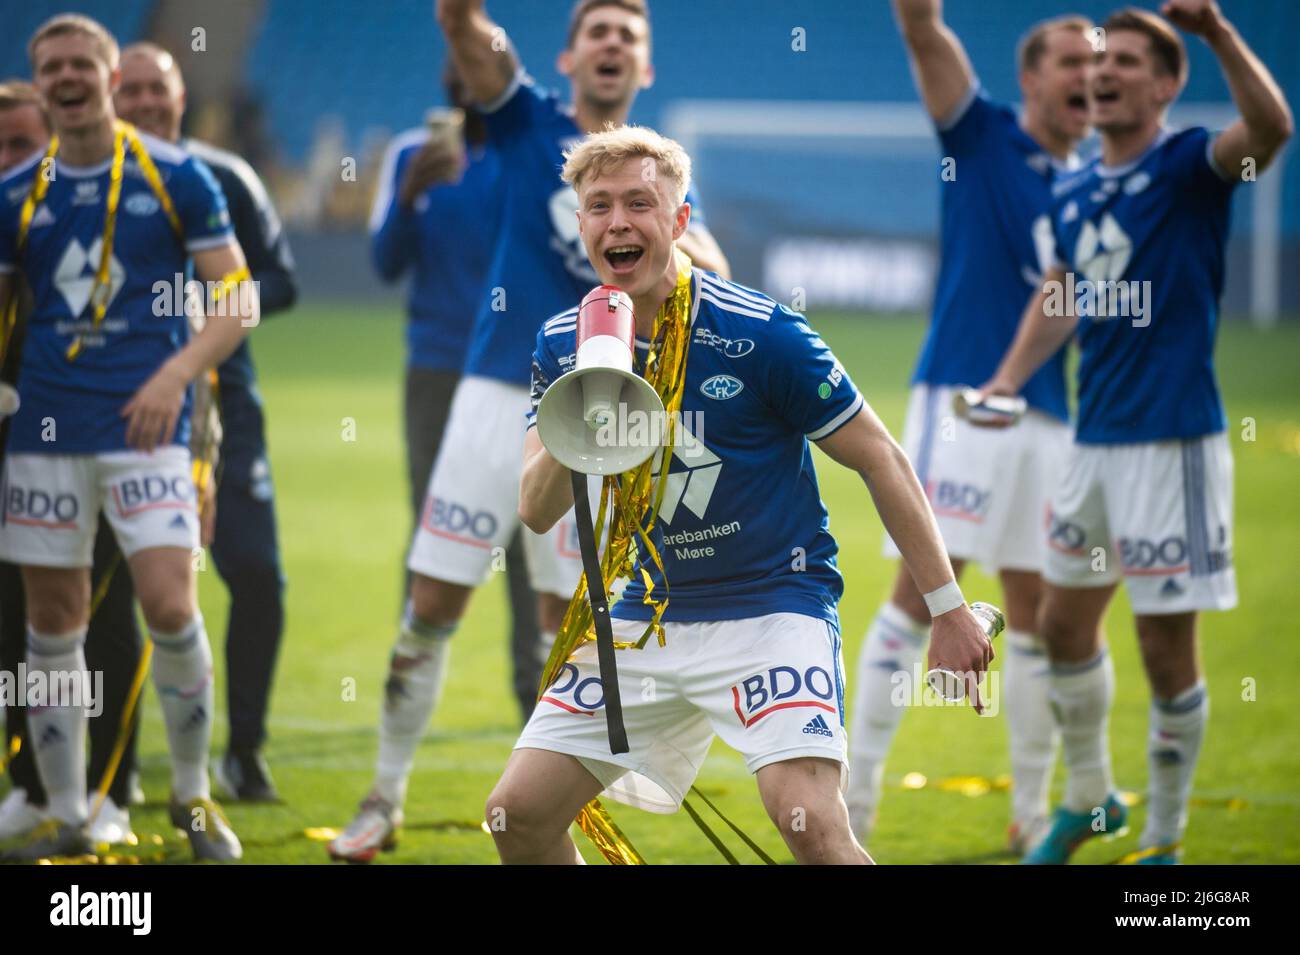 Oslo, Norway. 01st, May 2022. Ola Brynhildsen (11) of Molde seen celebrating the victory after the Norwegian Cup final, the NM Menn final, between Bodoe/Glimt and Molde at Ullevaal Stadion in Oslo. (Photo credit: Gonzales Photo - Jan-Erik Eriksen). Credit: Gonzales Photo/Alamy Live News Stock Photo